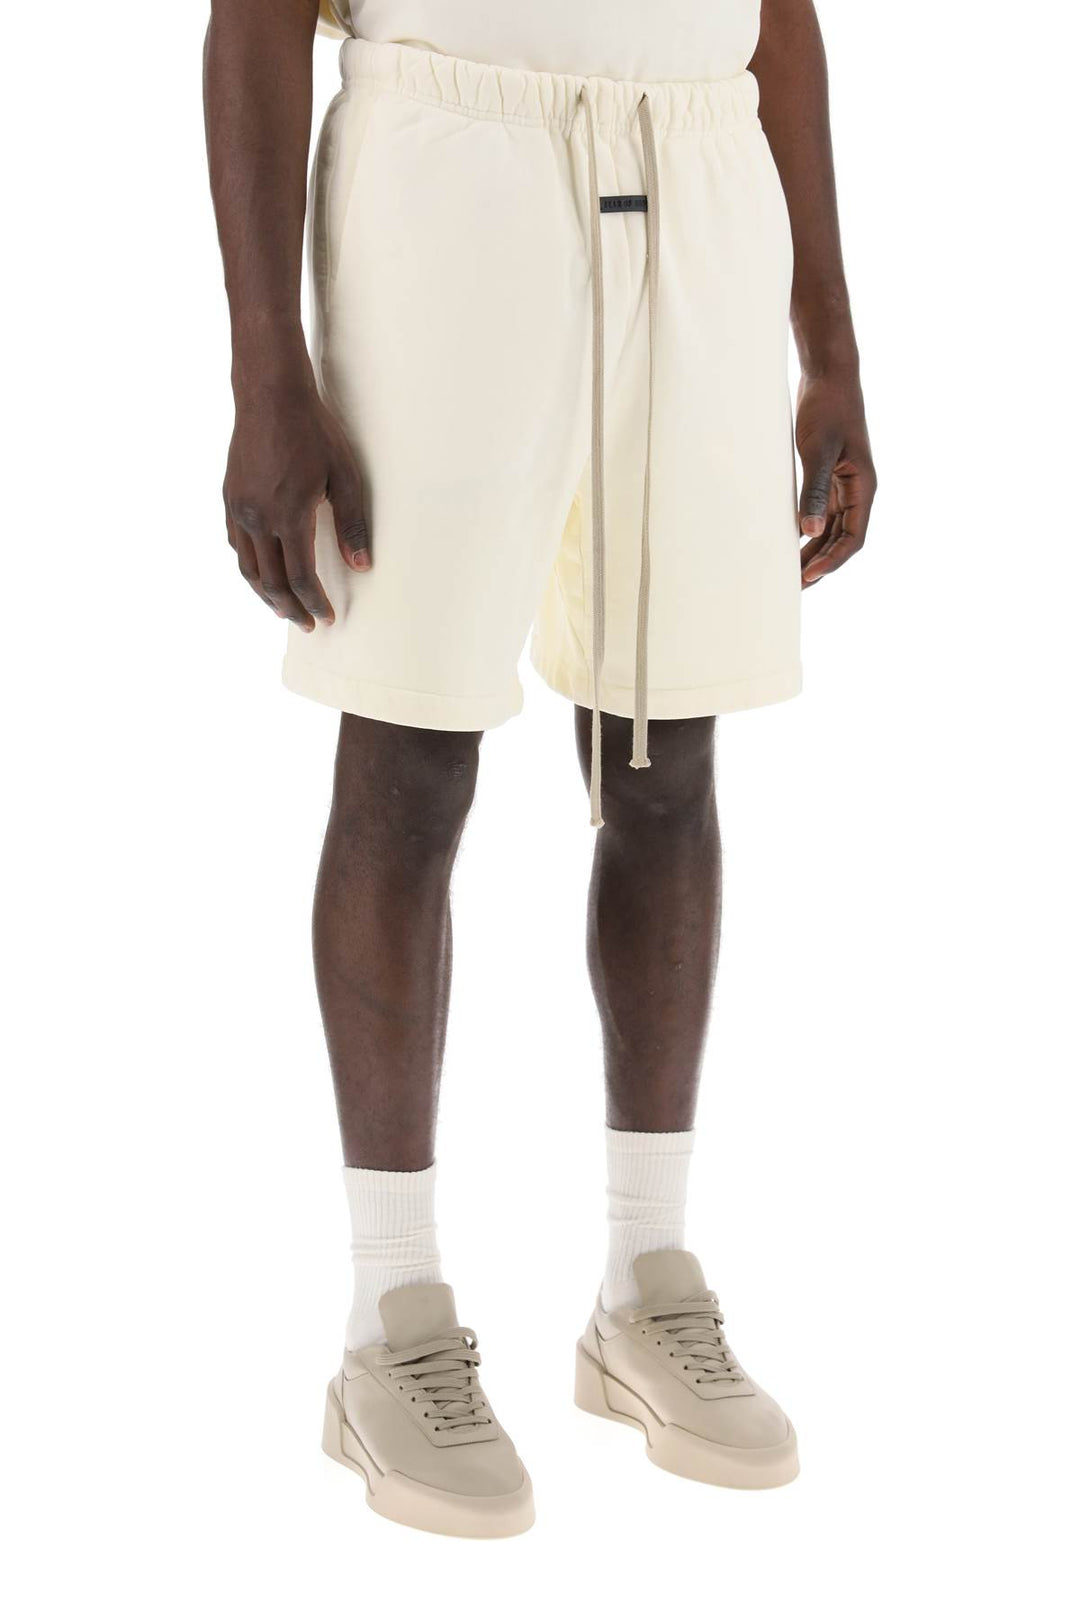 Fear Of God Cotton Terry Sports Bermuda Shorts   White